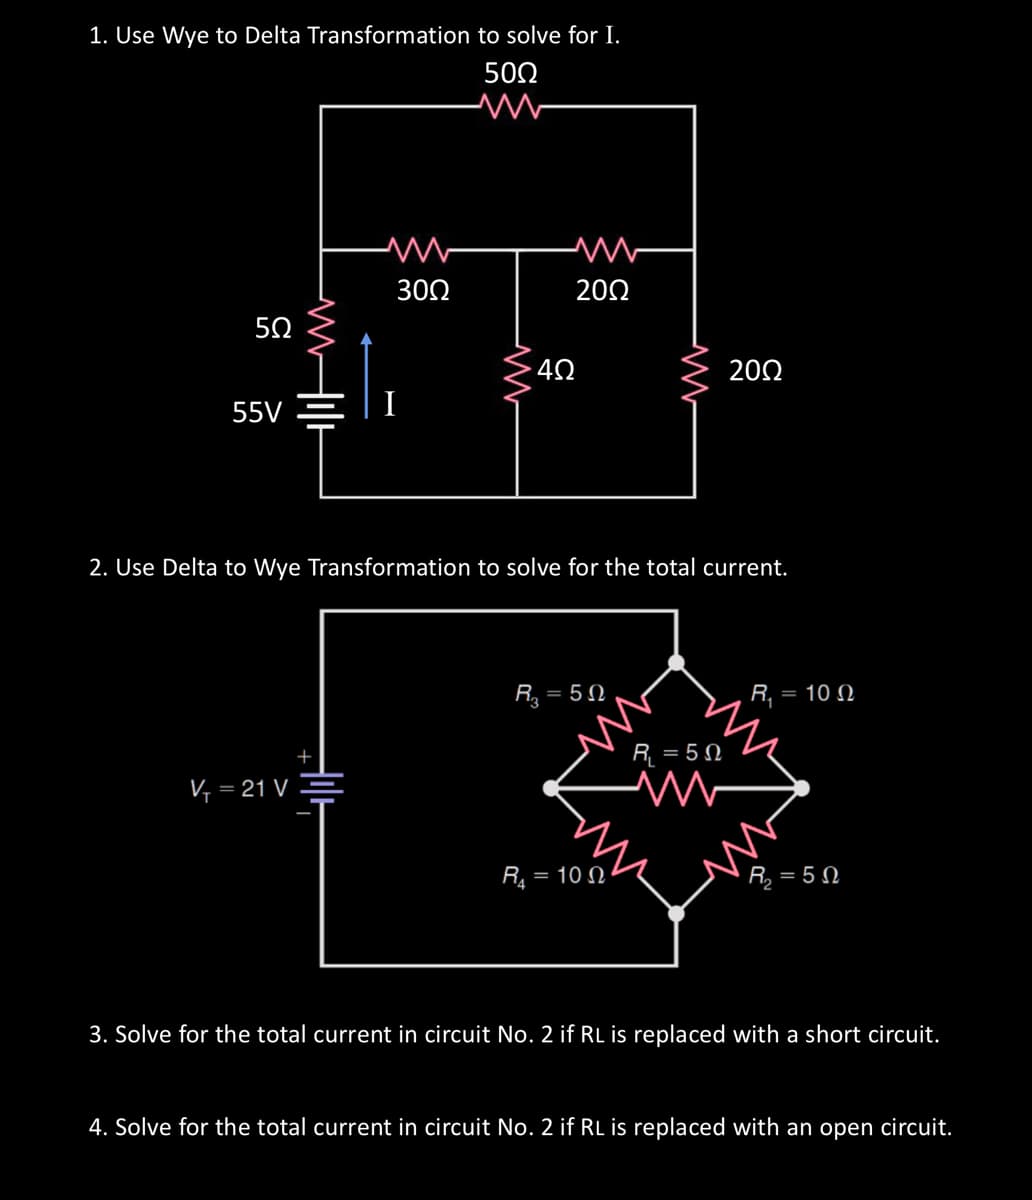 1. Use Wye to Delta Transformation to solve for I.
50Ω
www
55
5.02
55V
V₁ =
will
= 21 V
ww
30Ω
www
· 4Ω
2002
2. Use Delta to Wye Transformation to solve for the total current.
R₂ = = 5Ω
M
R₁ = 100
2002
R₁ = 50
M
R₁ = 100
R = 5 Ω
3. Solve for the total current in circuit No. 2 if RL is replaced with a short circuit.
4. Solve for the total current in circuit No. 2 if RL is replaced with an open circuit.